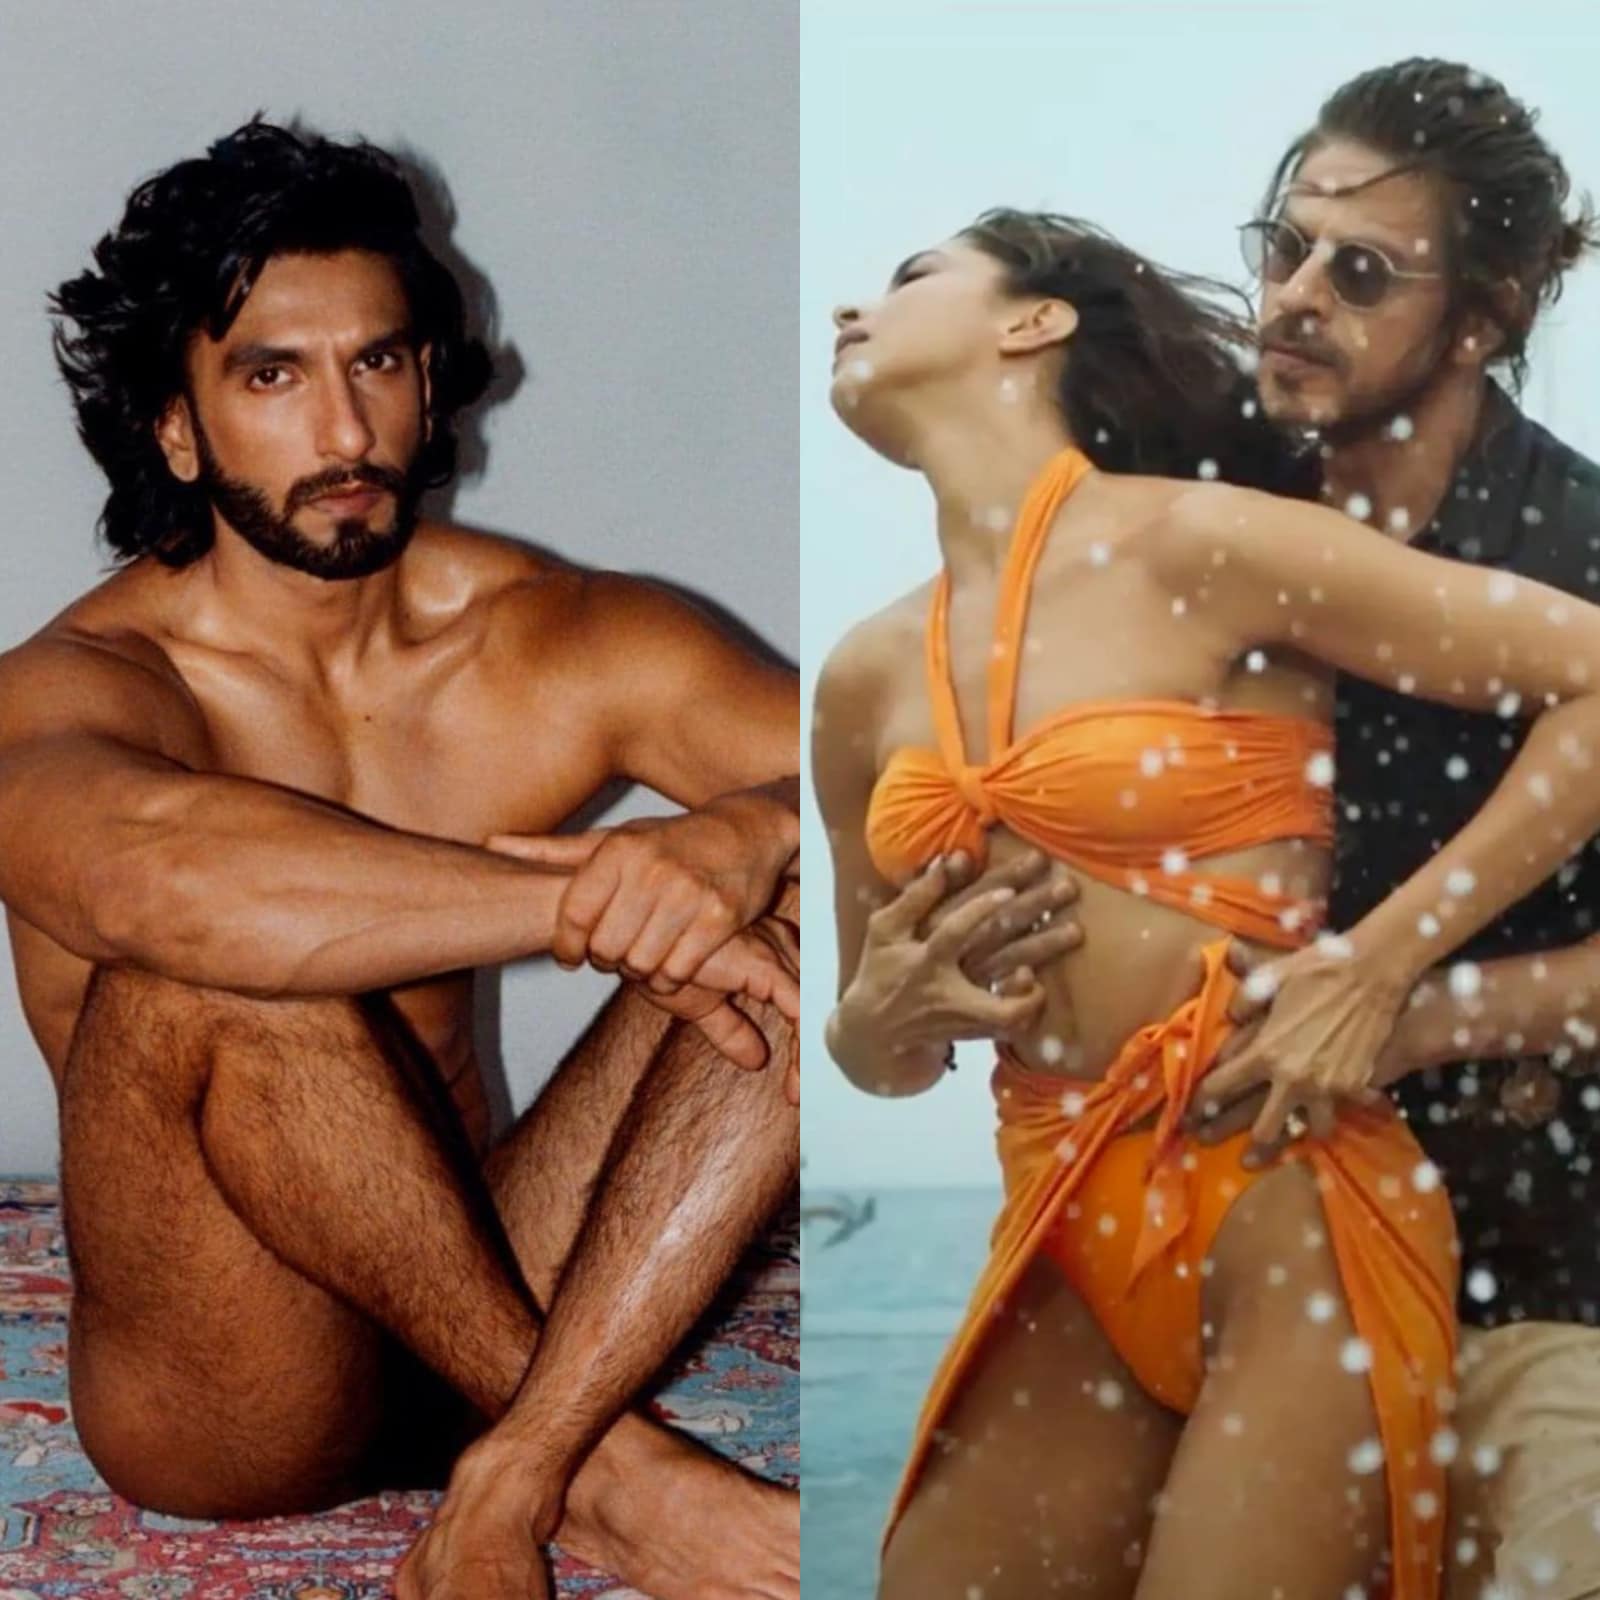 1600px x 1600px - Year Ender 2022: Deepika Padukone's Saffron Swimsuit in Besharam Rang to  Ranveer Singh's Nude Photoshoot, Bollywood's Biggest Controversies - News18